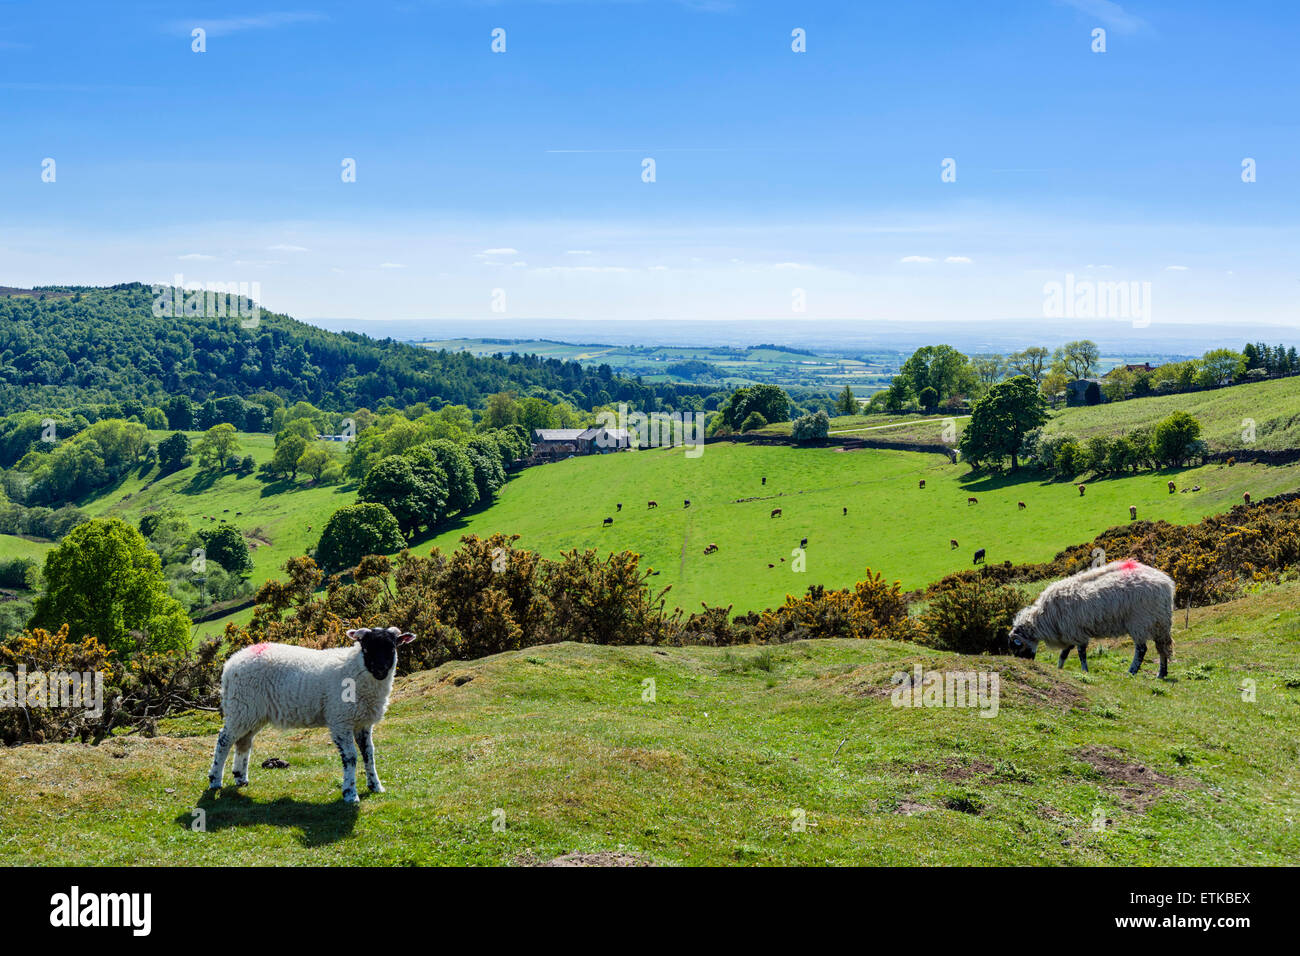 Sheep in the North York Moors countryside, Osmotherley, near Northallerton, North Yorkshire, England, UK Stock Photo